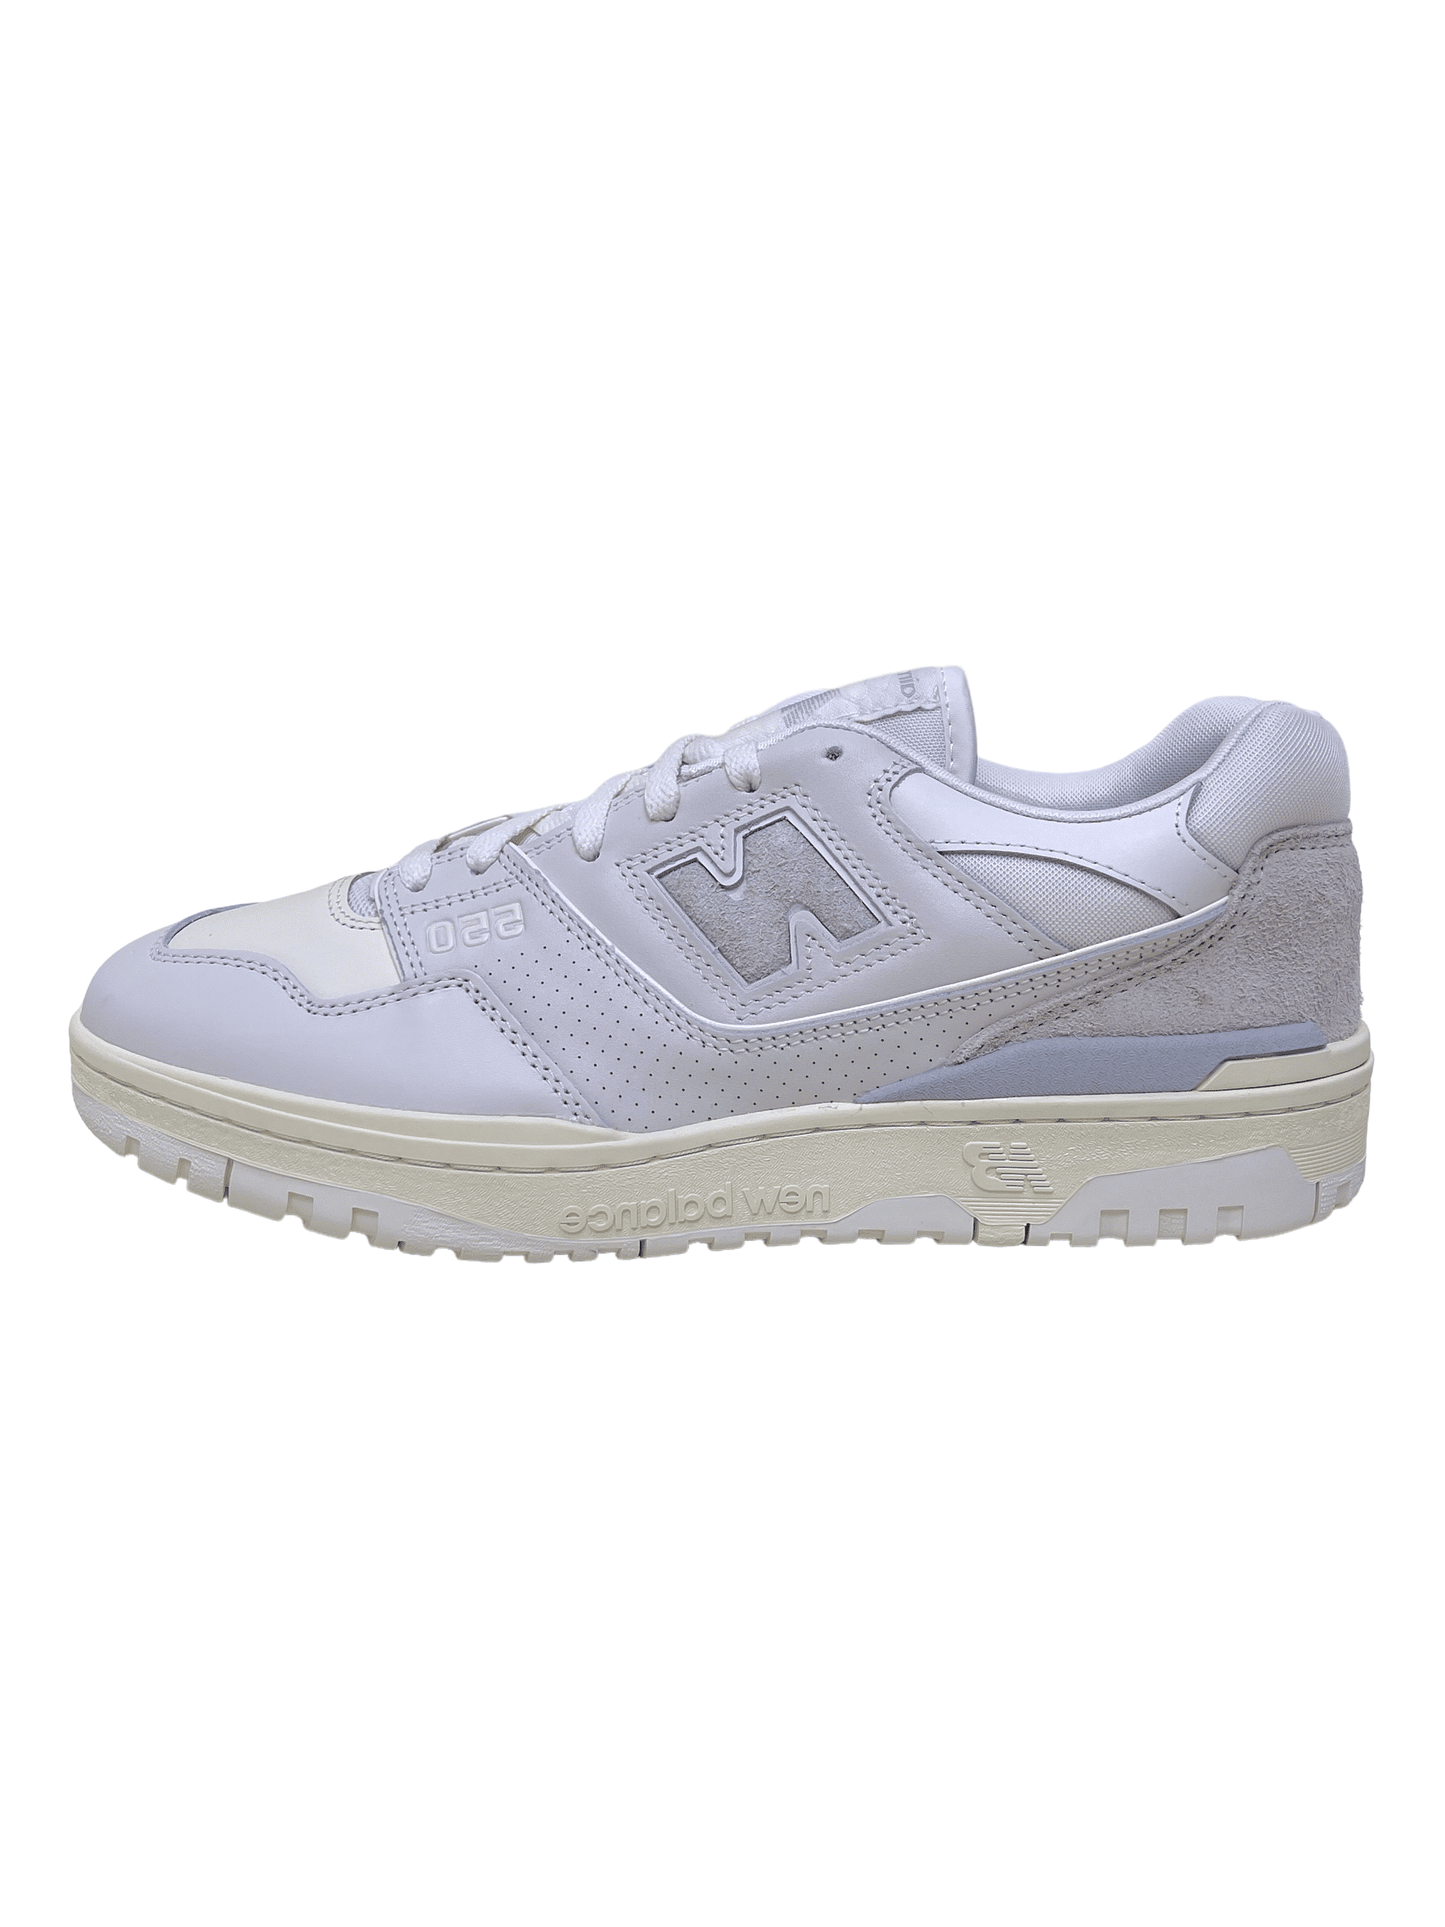 New Balance 550 Aime Leon Dore White Leather Sneakers